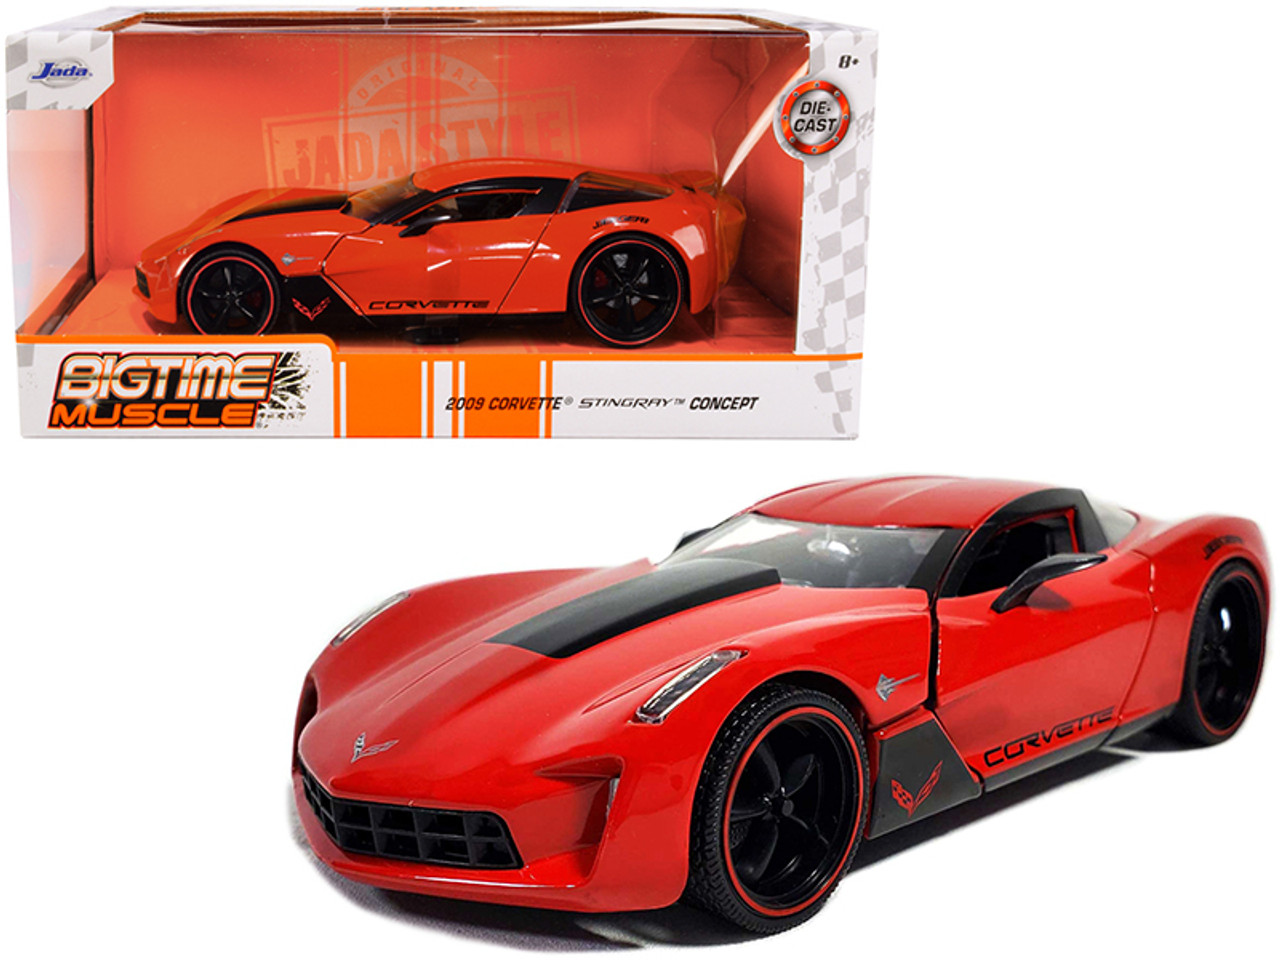 2009 Chevrolet Corvette Stingray Concept Red with Black Stripes "Bigtime Muscle" Series 1/24 Diecast Model Car by Jada